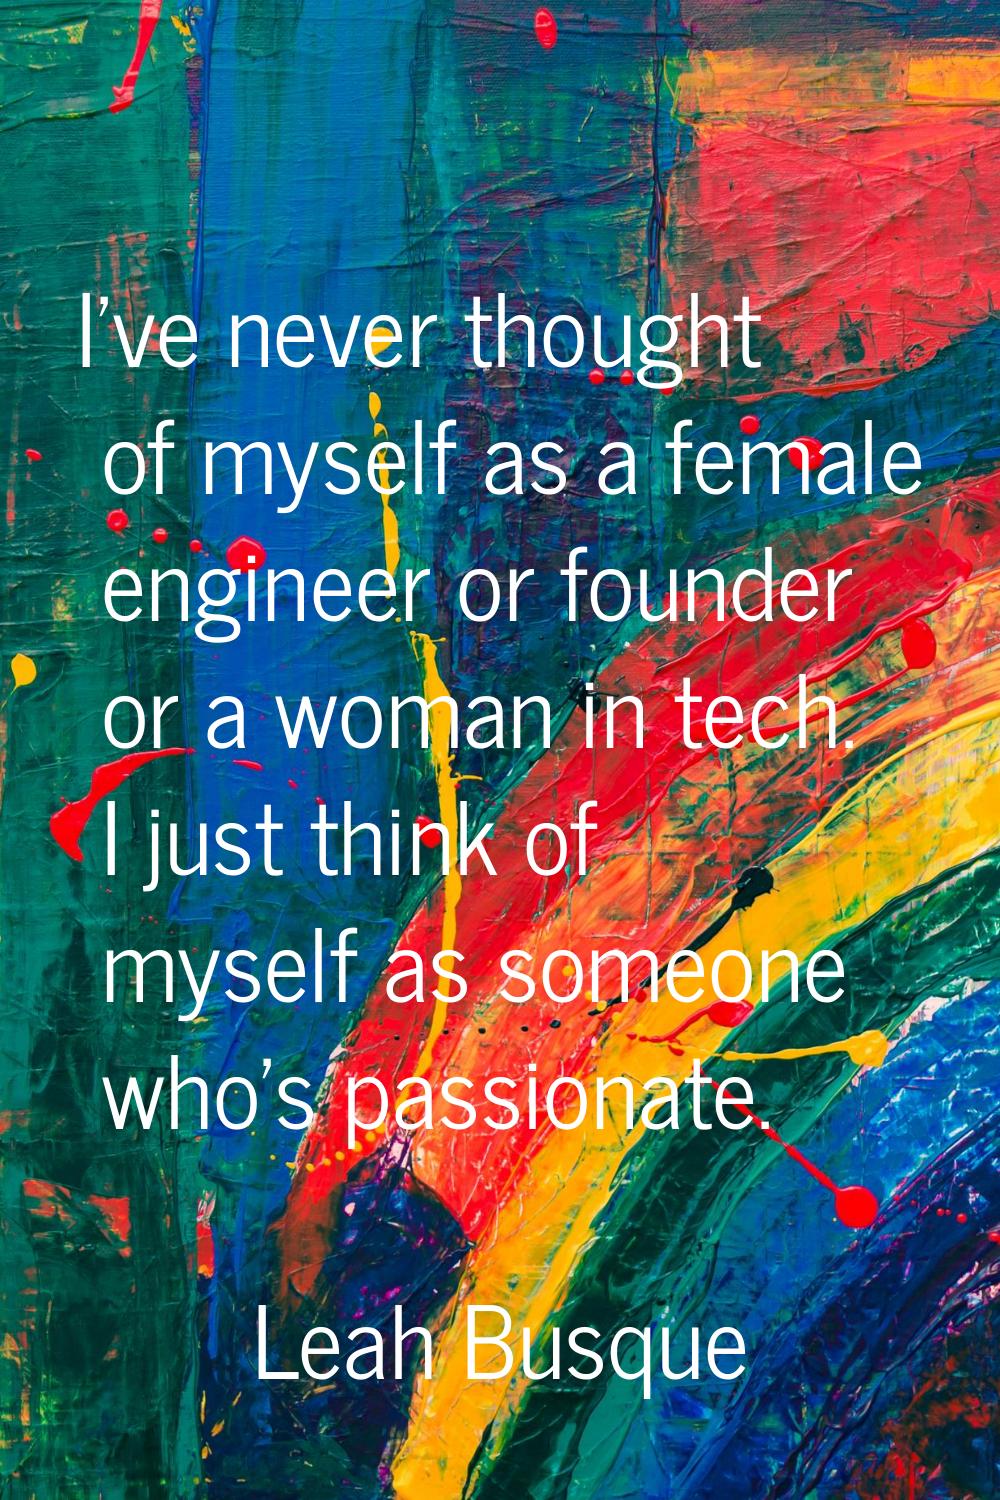 I've never thought of myself as a female engineer or founder or a woman in tech. I just think of my